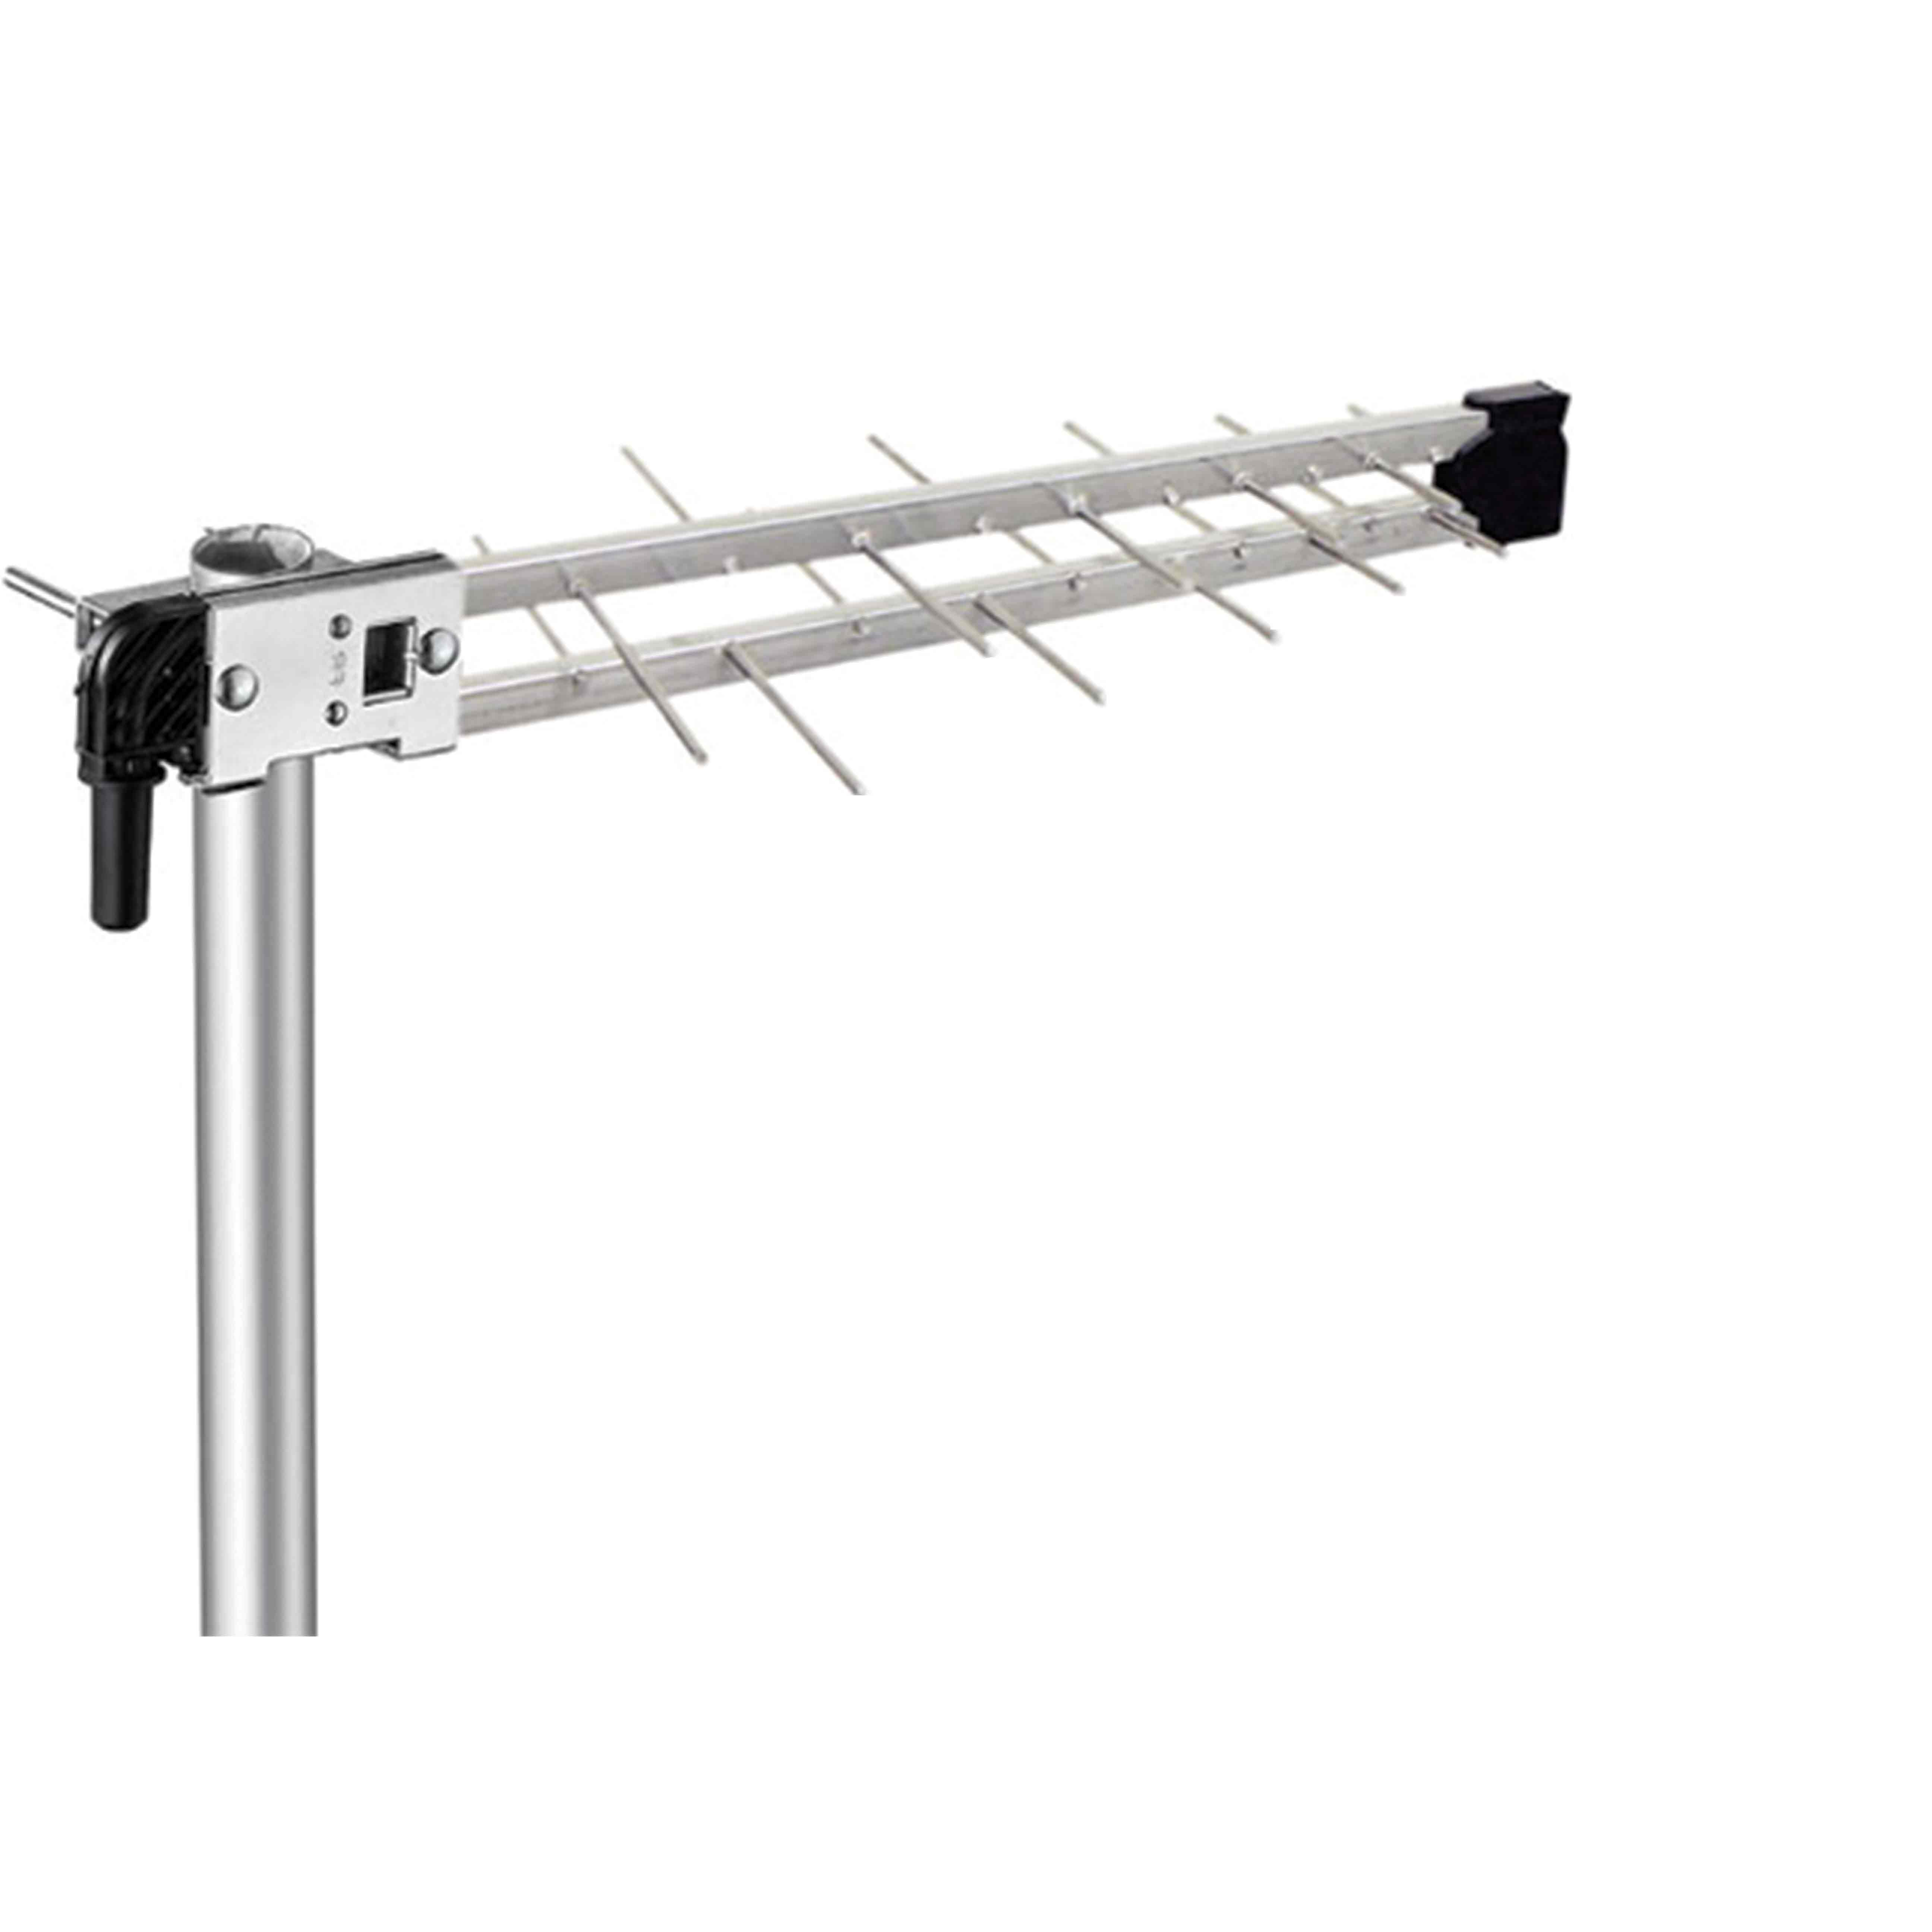 FRACARRO Log Periodic UHF 9dBi Gain TV Antenna with 4G and 5G Rejection - Click for more info